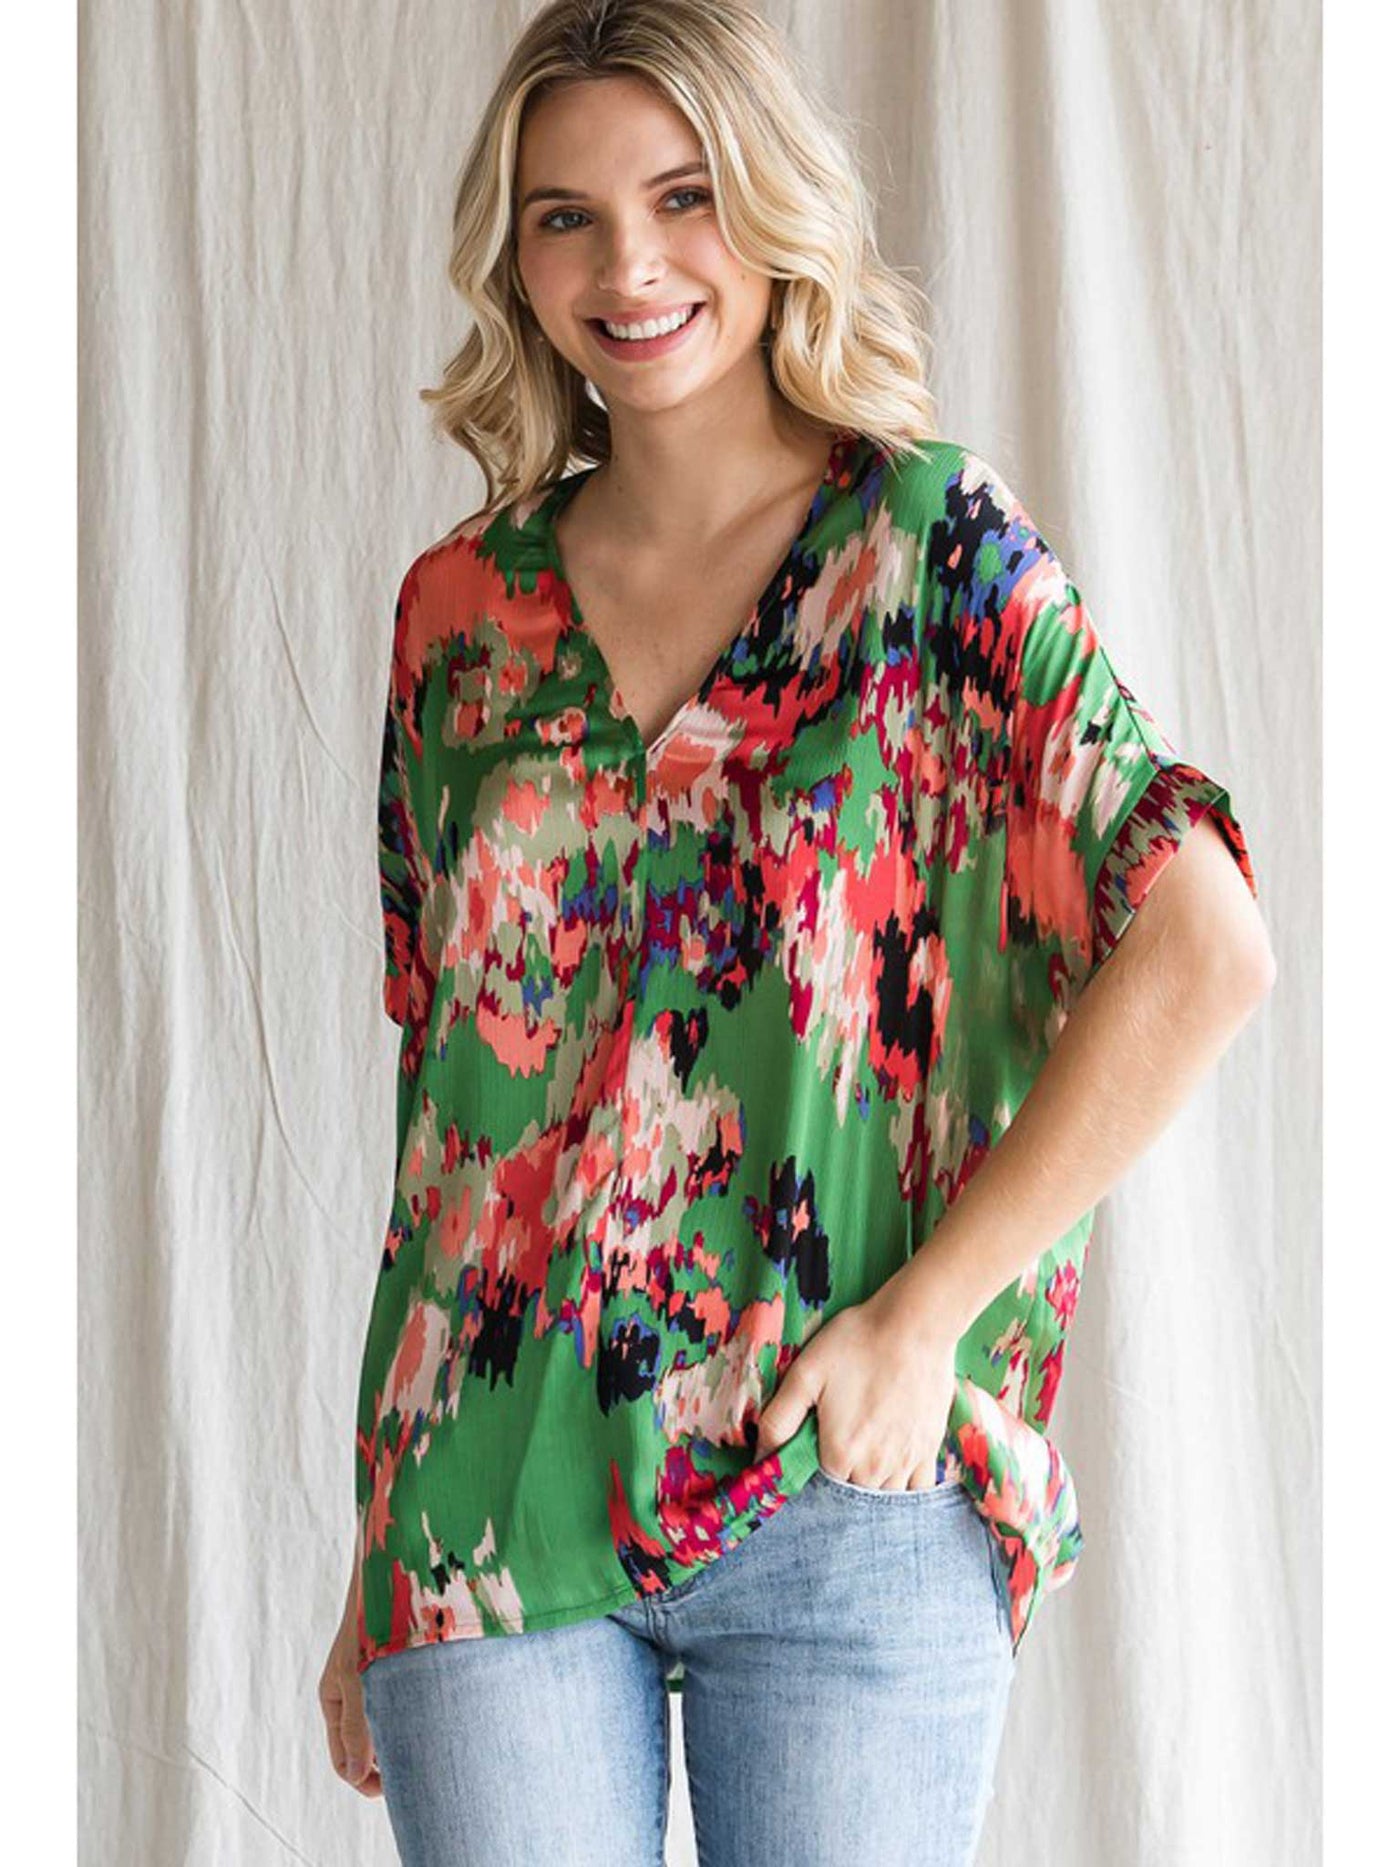 Curvy Live Colorfully Print Top